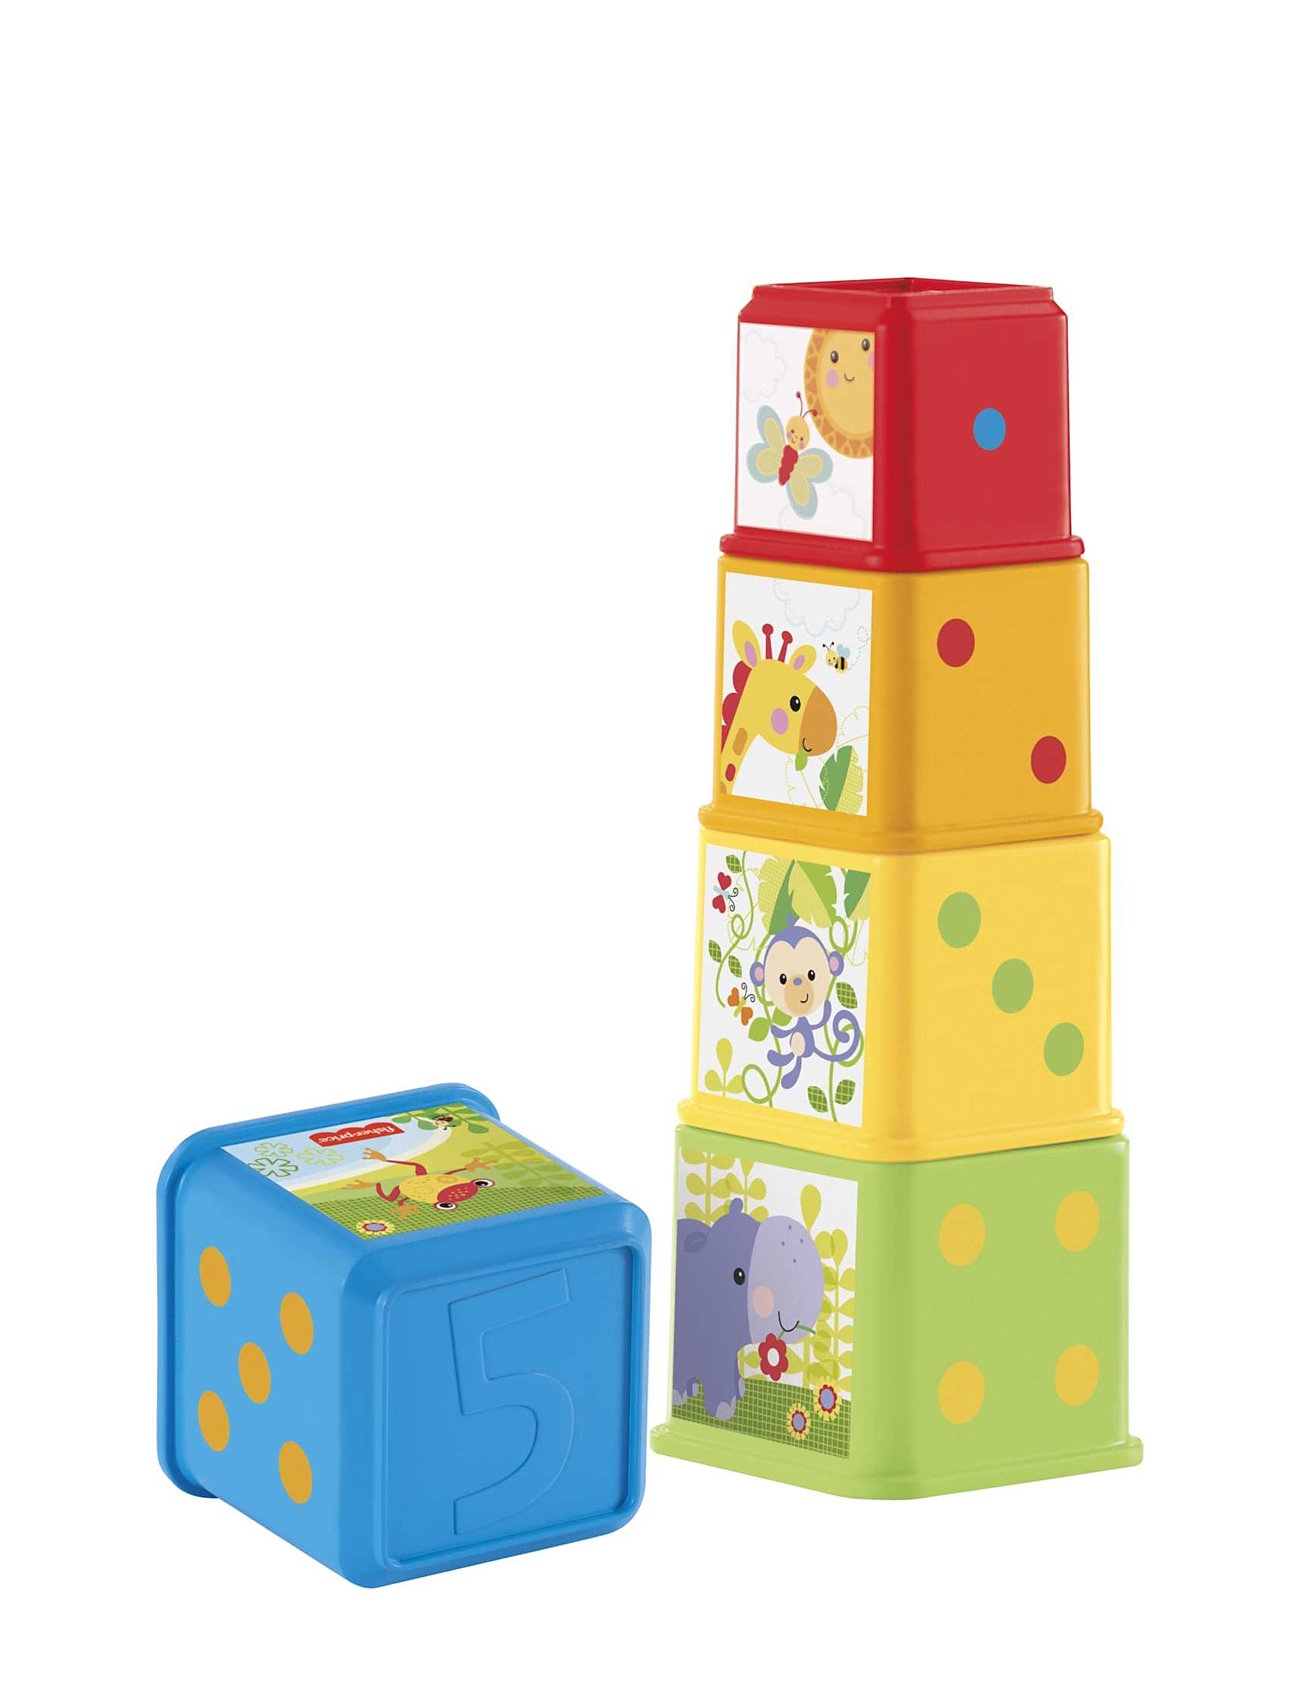 Stack & Explore Blocks Toys Baby Toys Educational Toys Stackable Blocks Multi/patterned Fisher-Price